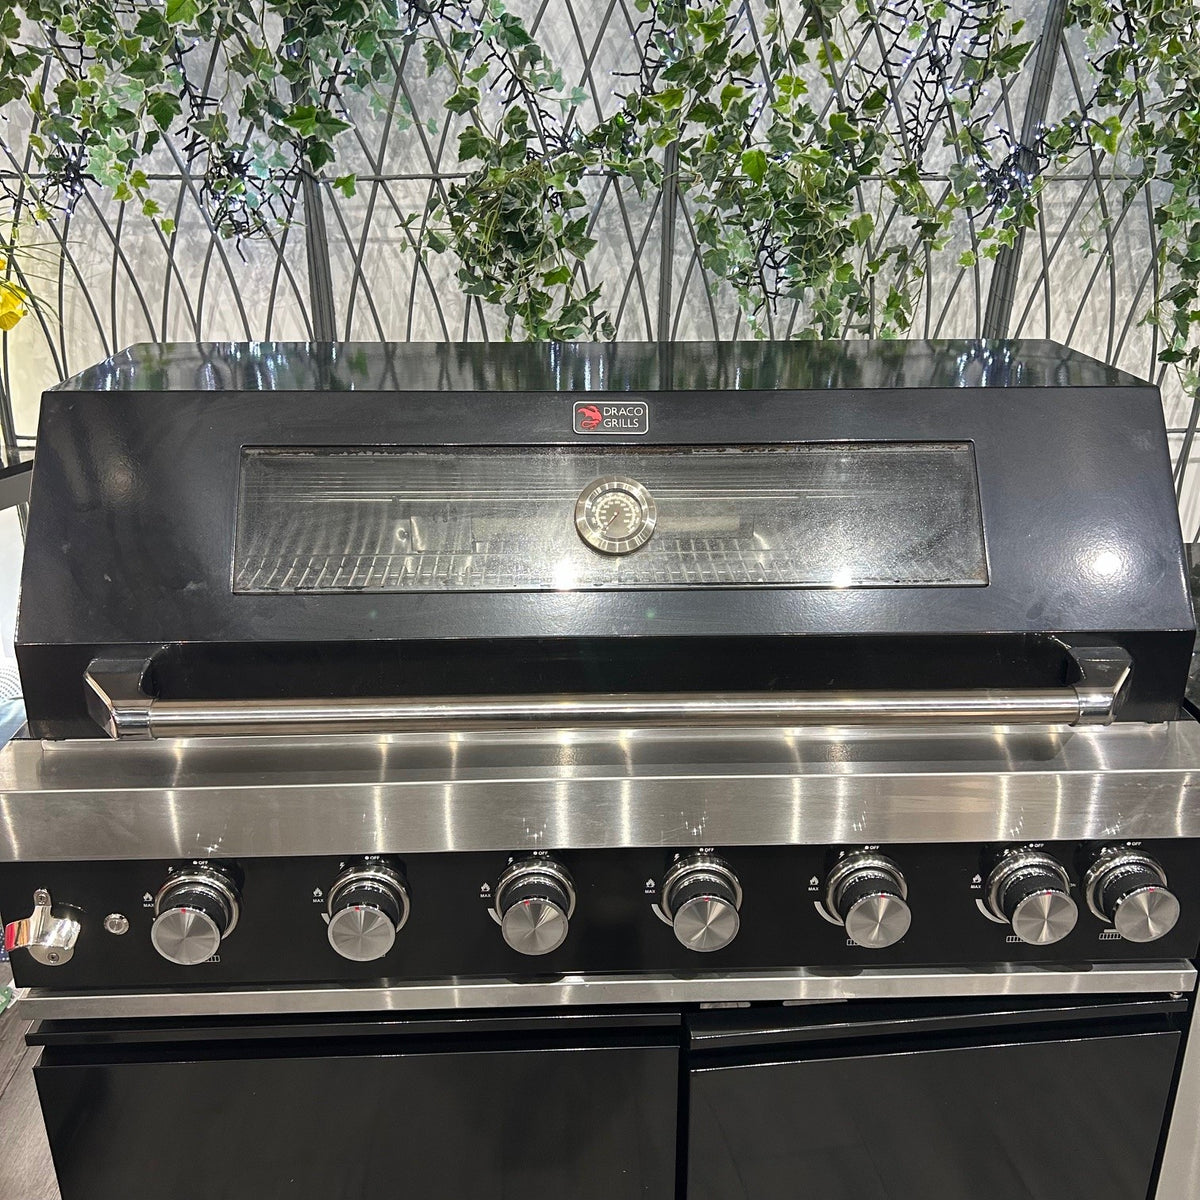 Ex Display Draco Grills 6 Burner Black Outdoor Kitchen with Stainless Steel Single Fridge Unit